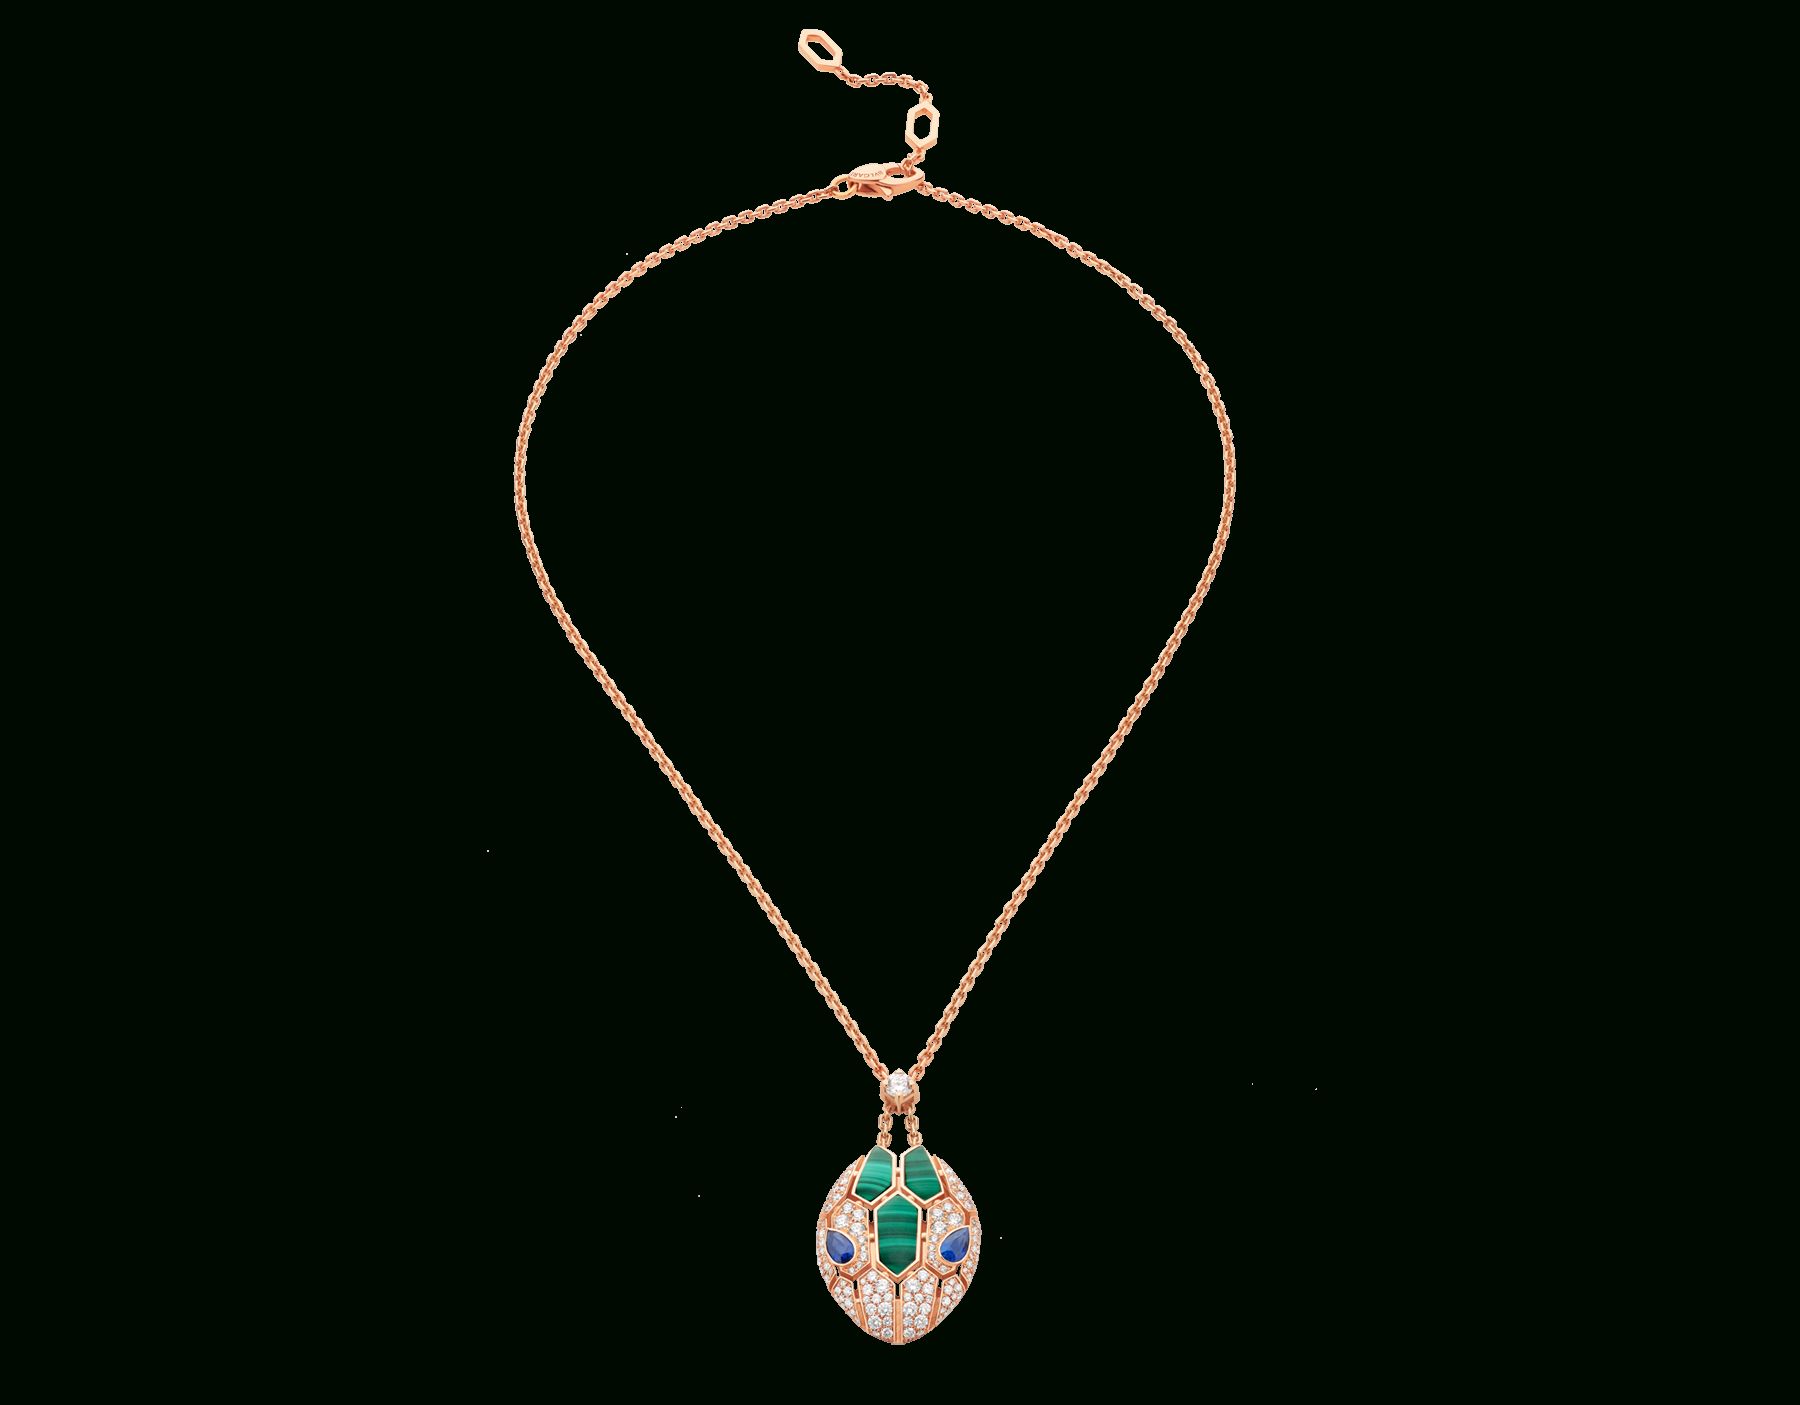 Serpenti Necklace 356782 | Bvlgari Inside Latest Pavé Locket Element Necklaces (View 14 of 25)